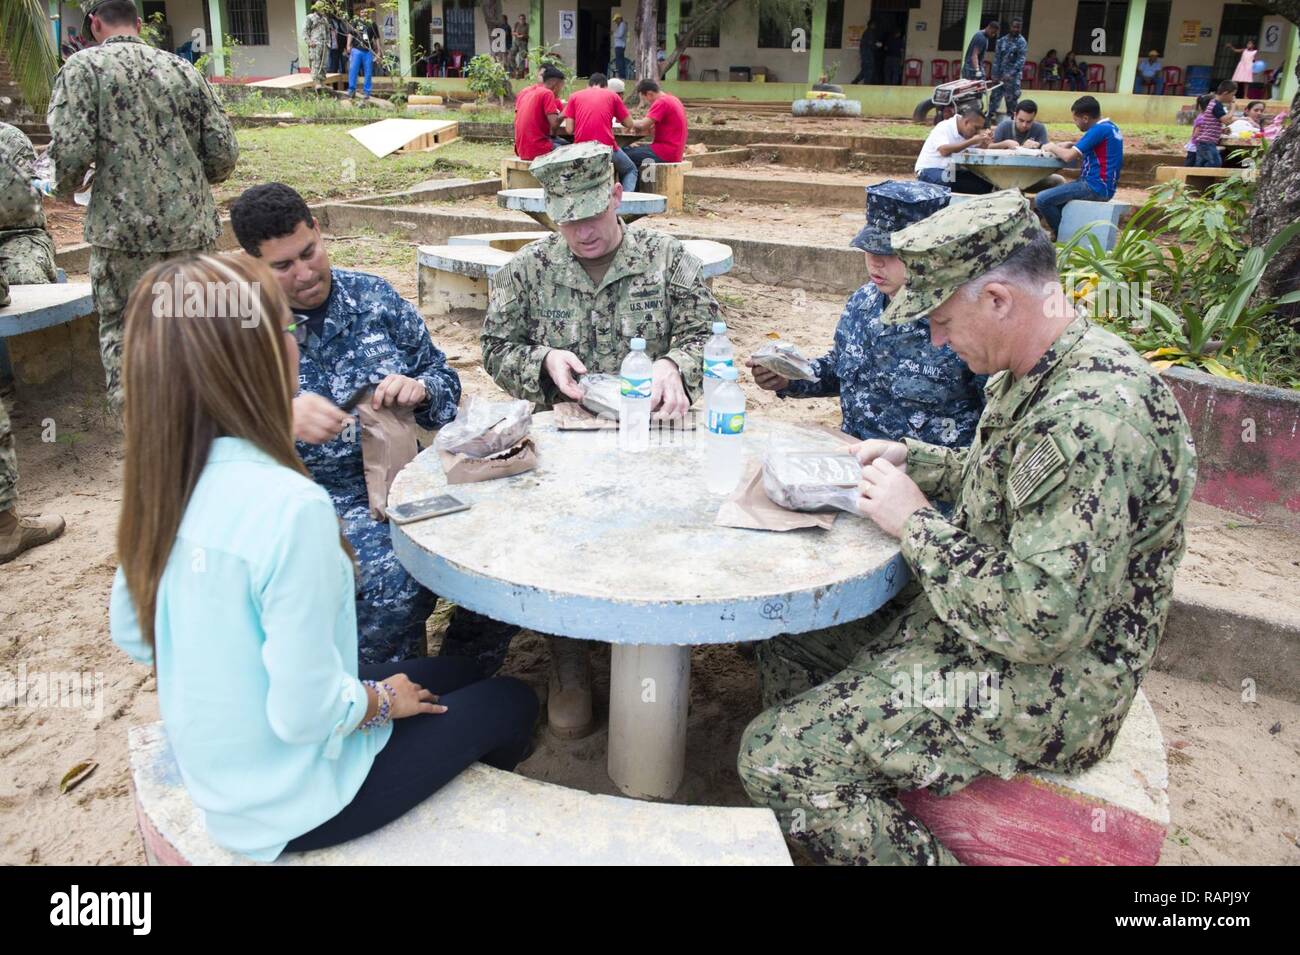 TRUJILLO, Honduras (Feb. 23, 2017) – Rear Adm. Sean S. Buck, Commander U.S. Naval Forces Southern Command/U.S. 4th Fleet NAVSO/FOURTHFLT), eats lunch with Sailors and the acting governor of Colon, Honduras during a tour of the Continuing Promise 2017 (CP-17) medical site in support of the mission's visit to Trujillo, Honduras. CP-17 is a U.S. Southern Command-sponsored and U.S. Naval Forces Southern Command/U.S. 4th Fleet-conducted deployment to conduct civil-military operations including humanitarian assistance, training engagements, and medical, dental, and veterinary support in an effort to Stock Photo